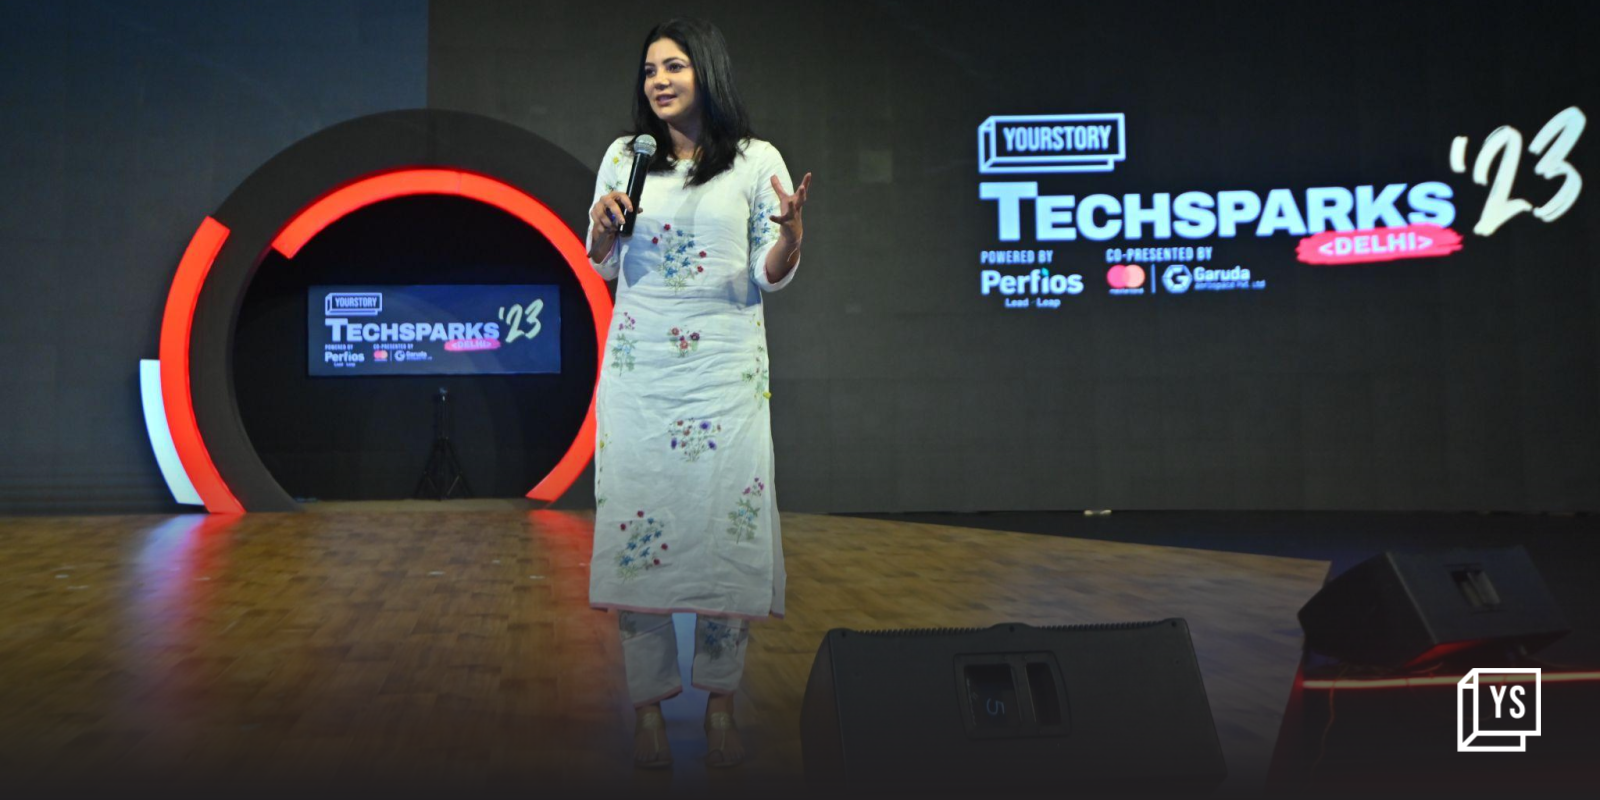 Each of us has to define our own way, Shradha Sharma tells entrepreneurs, as she kicks off first-ever Delhi edition of TechSparks